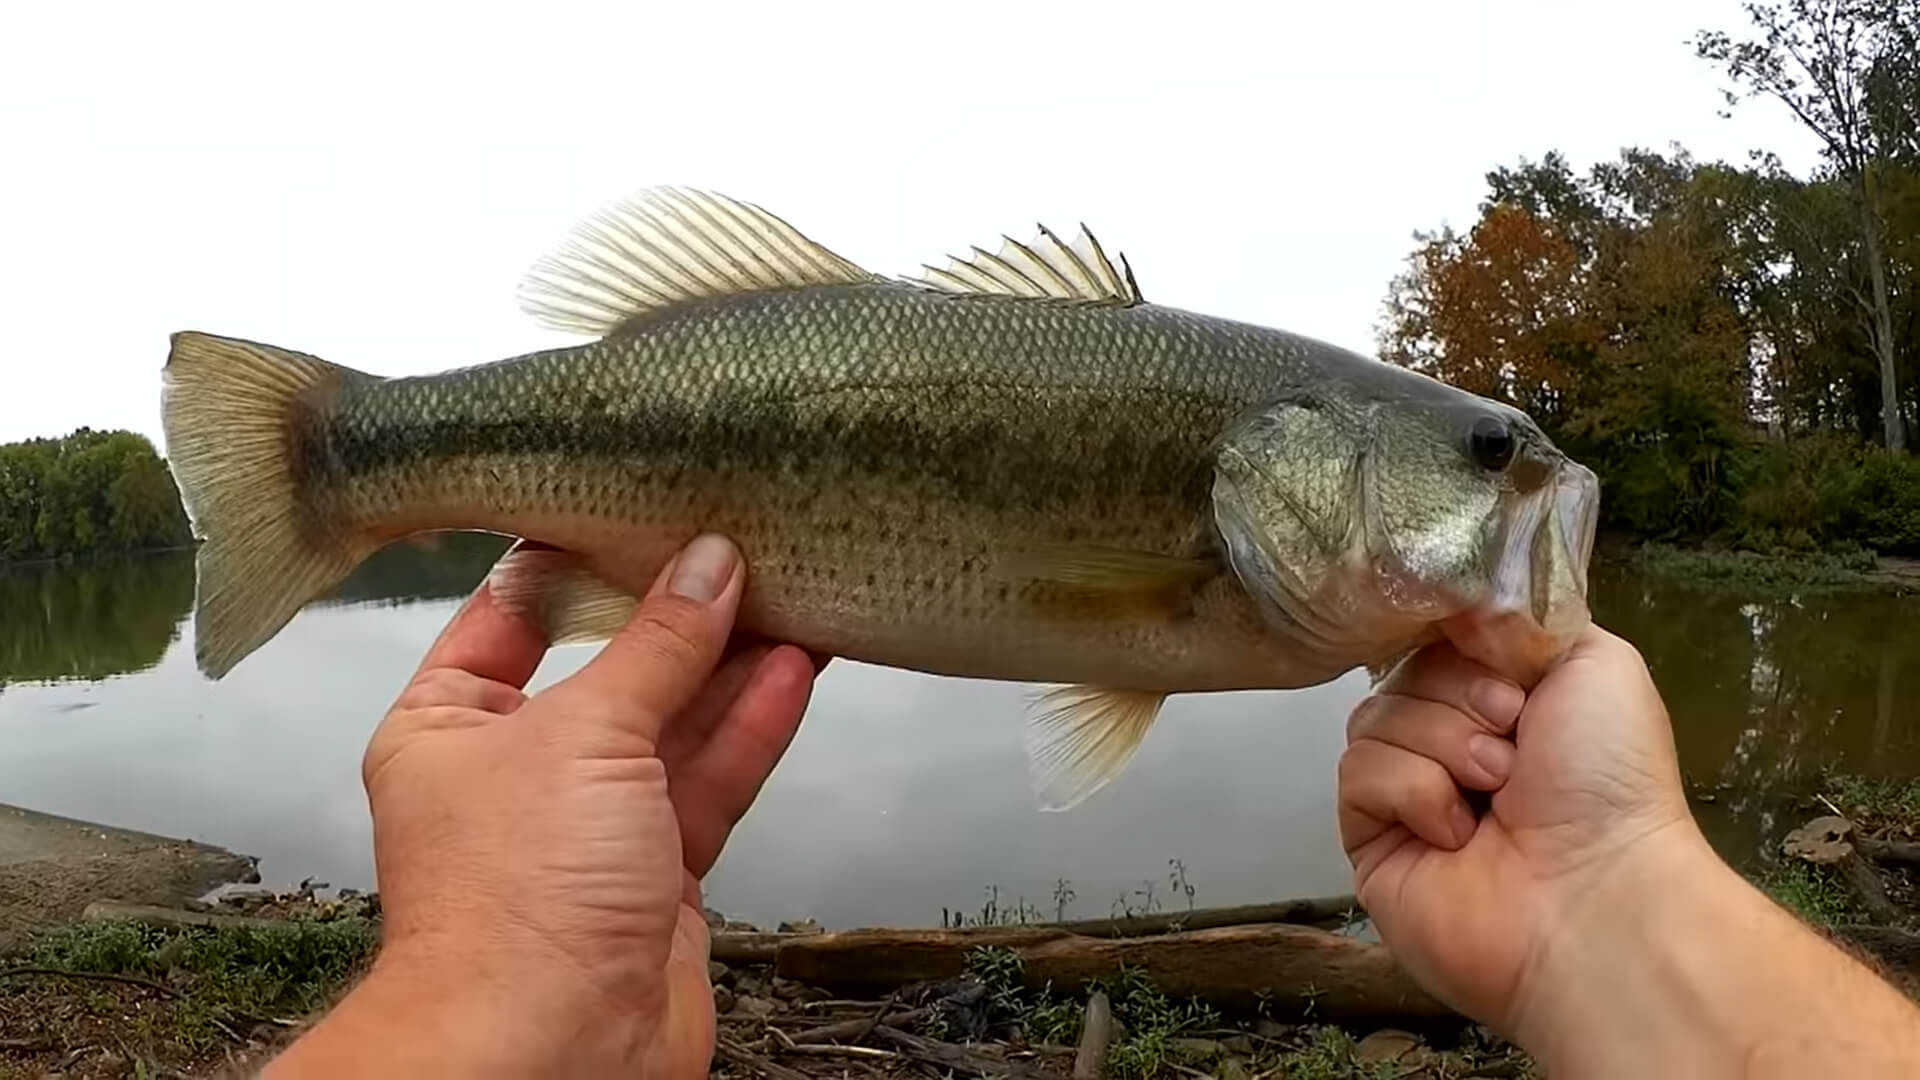 Bass Fishing With a Texas Rig Worm that Cost 25 cents Budget Fishing - Realistic Fishing